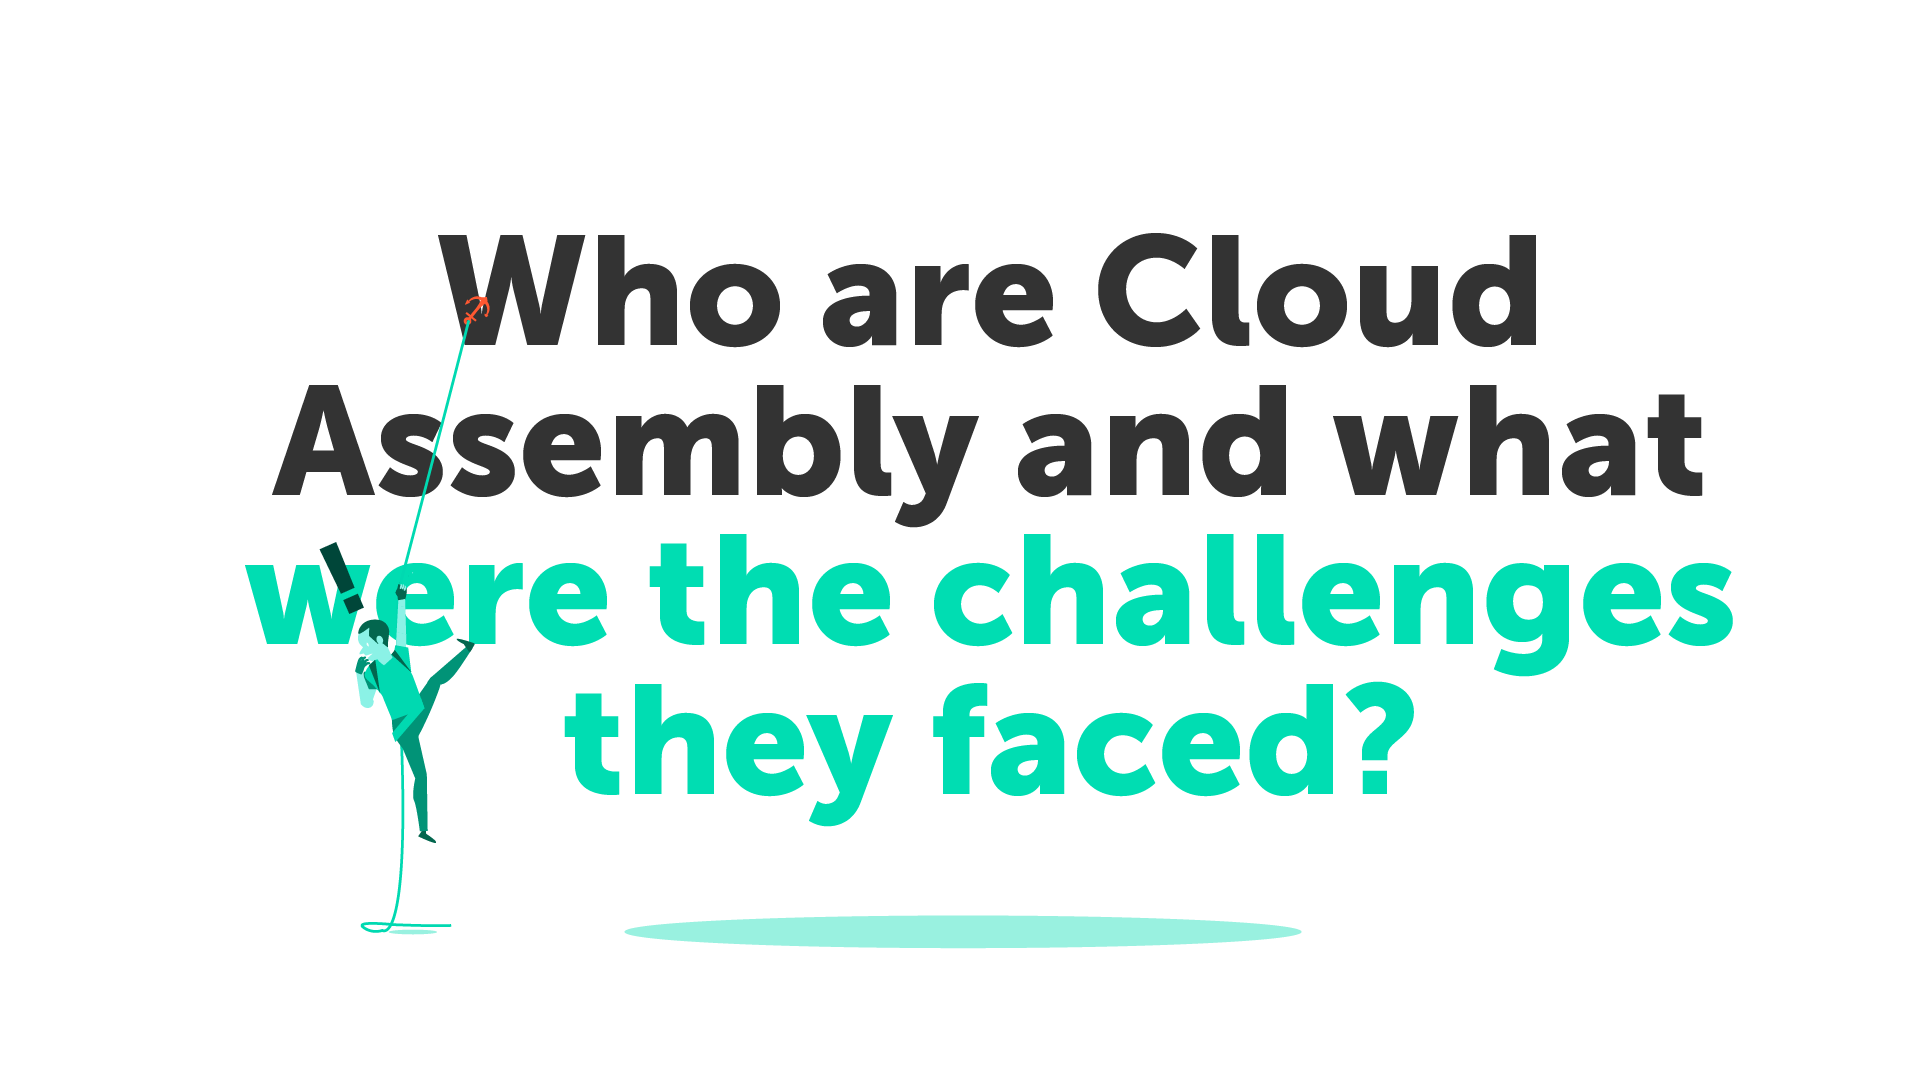 Who are Cloud Assembly and what were the challenges they faced?